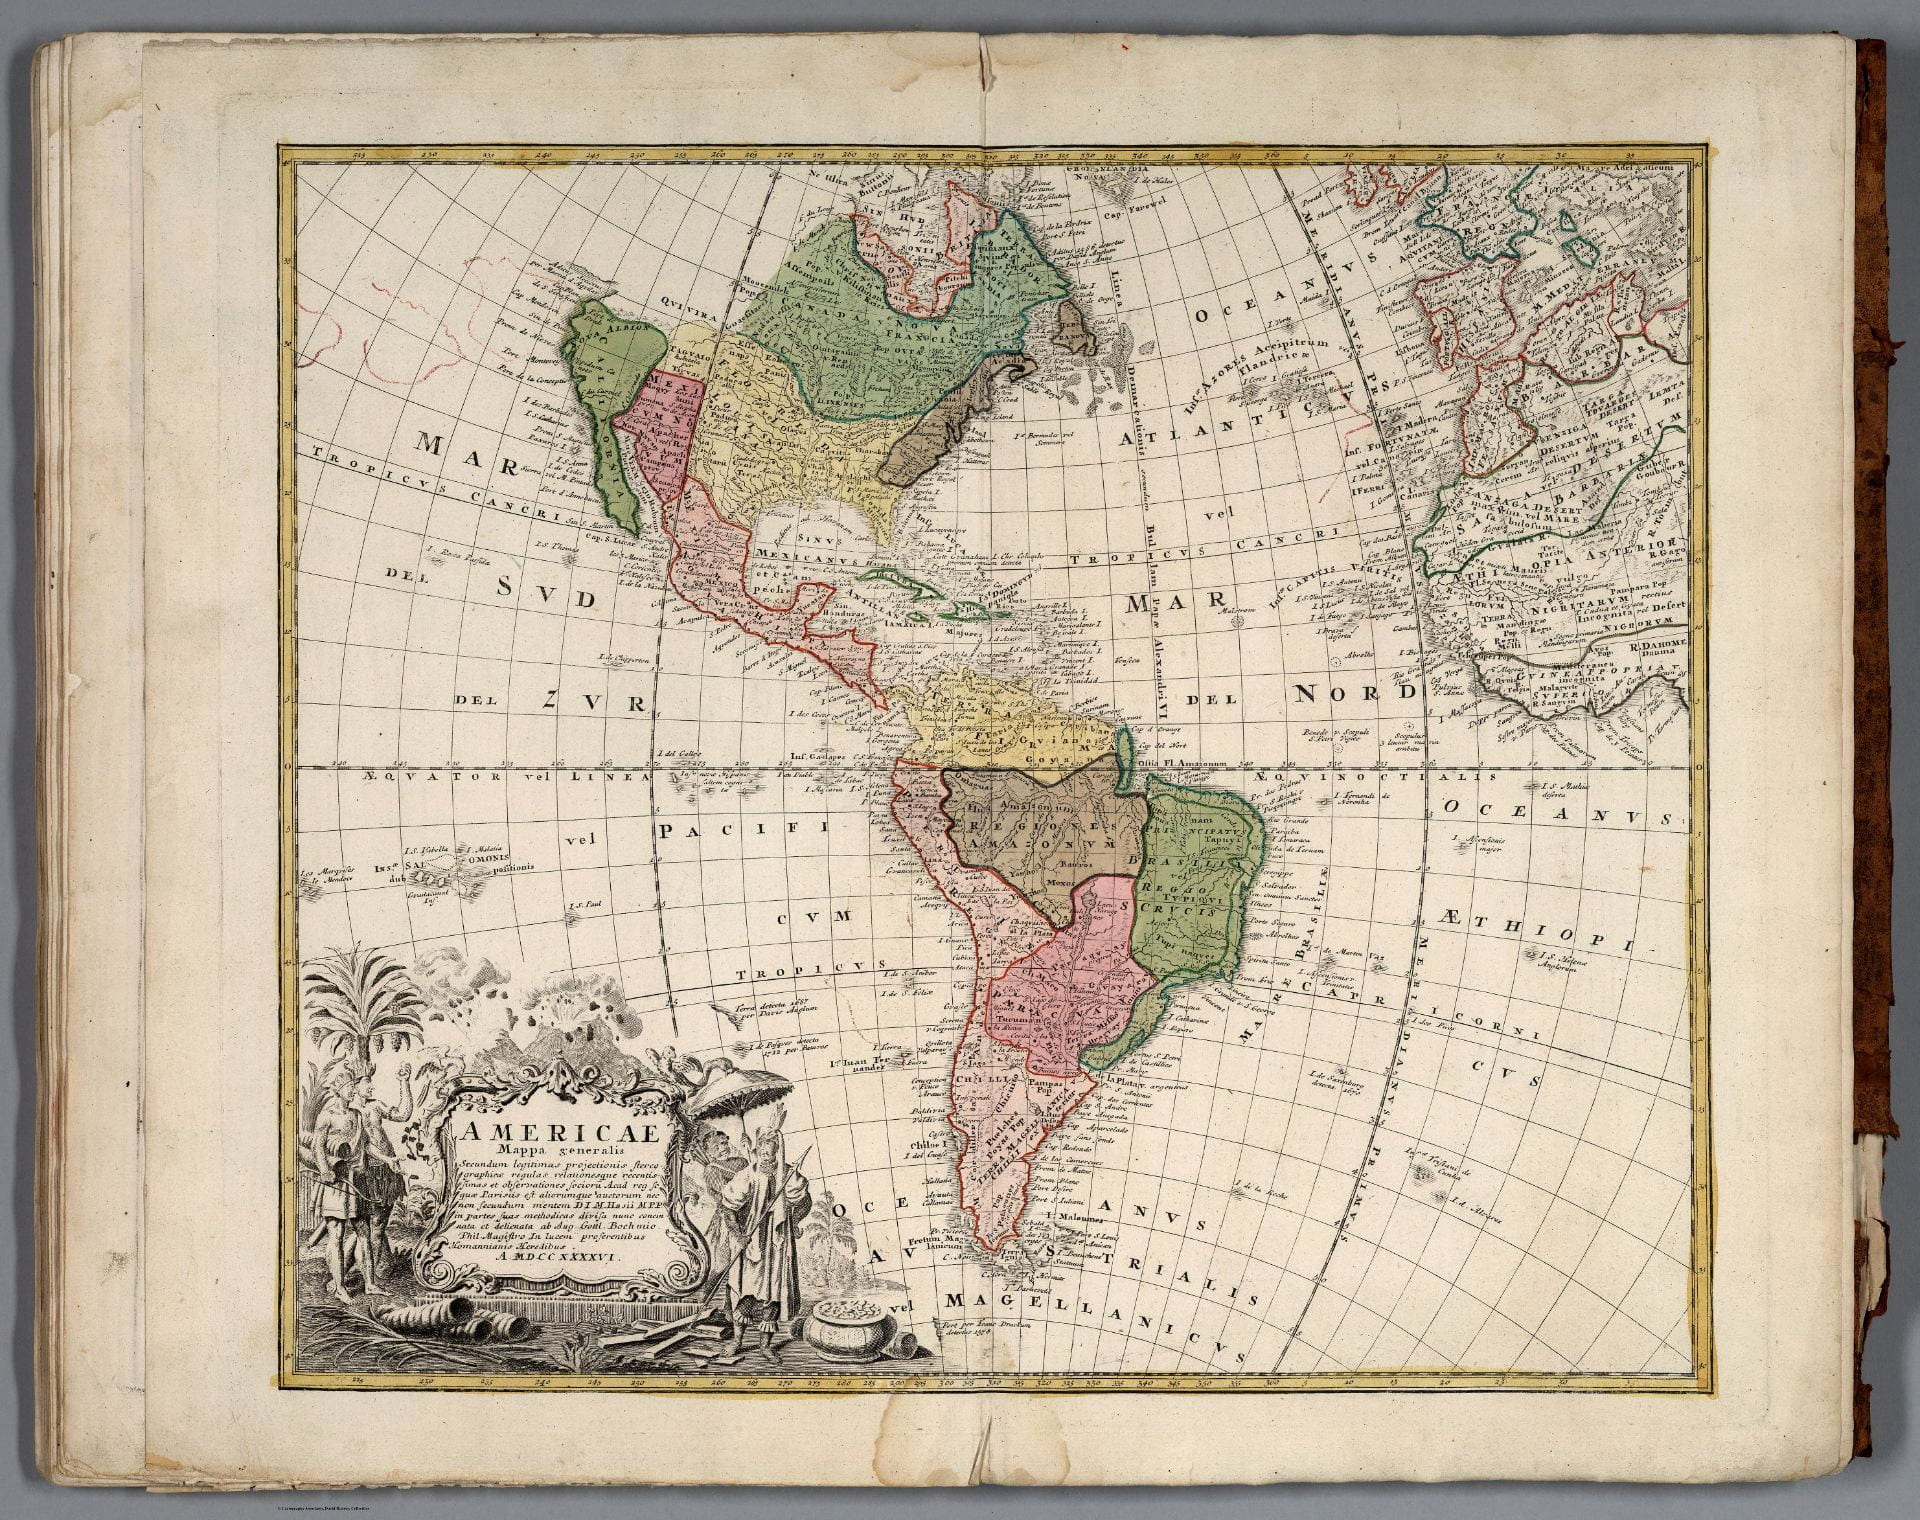 A 1746 German-produced map of the Americas.